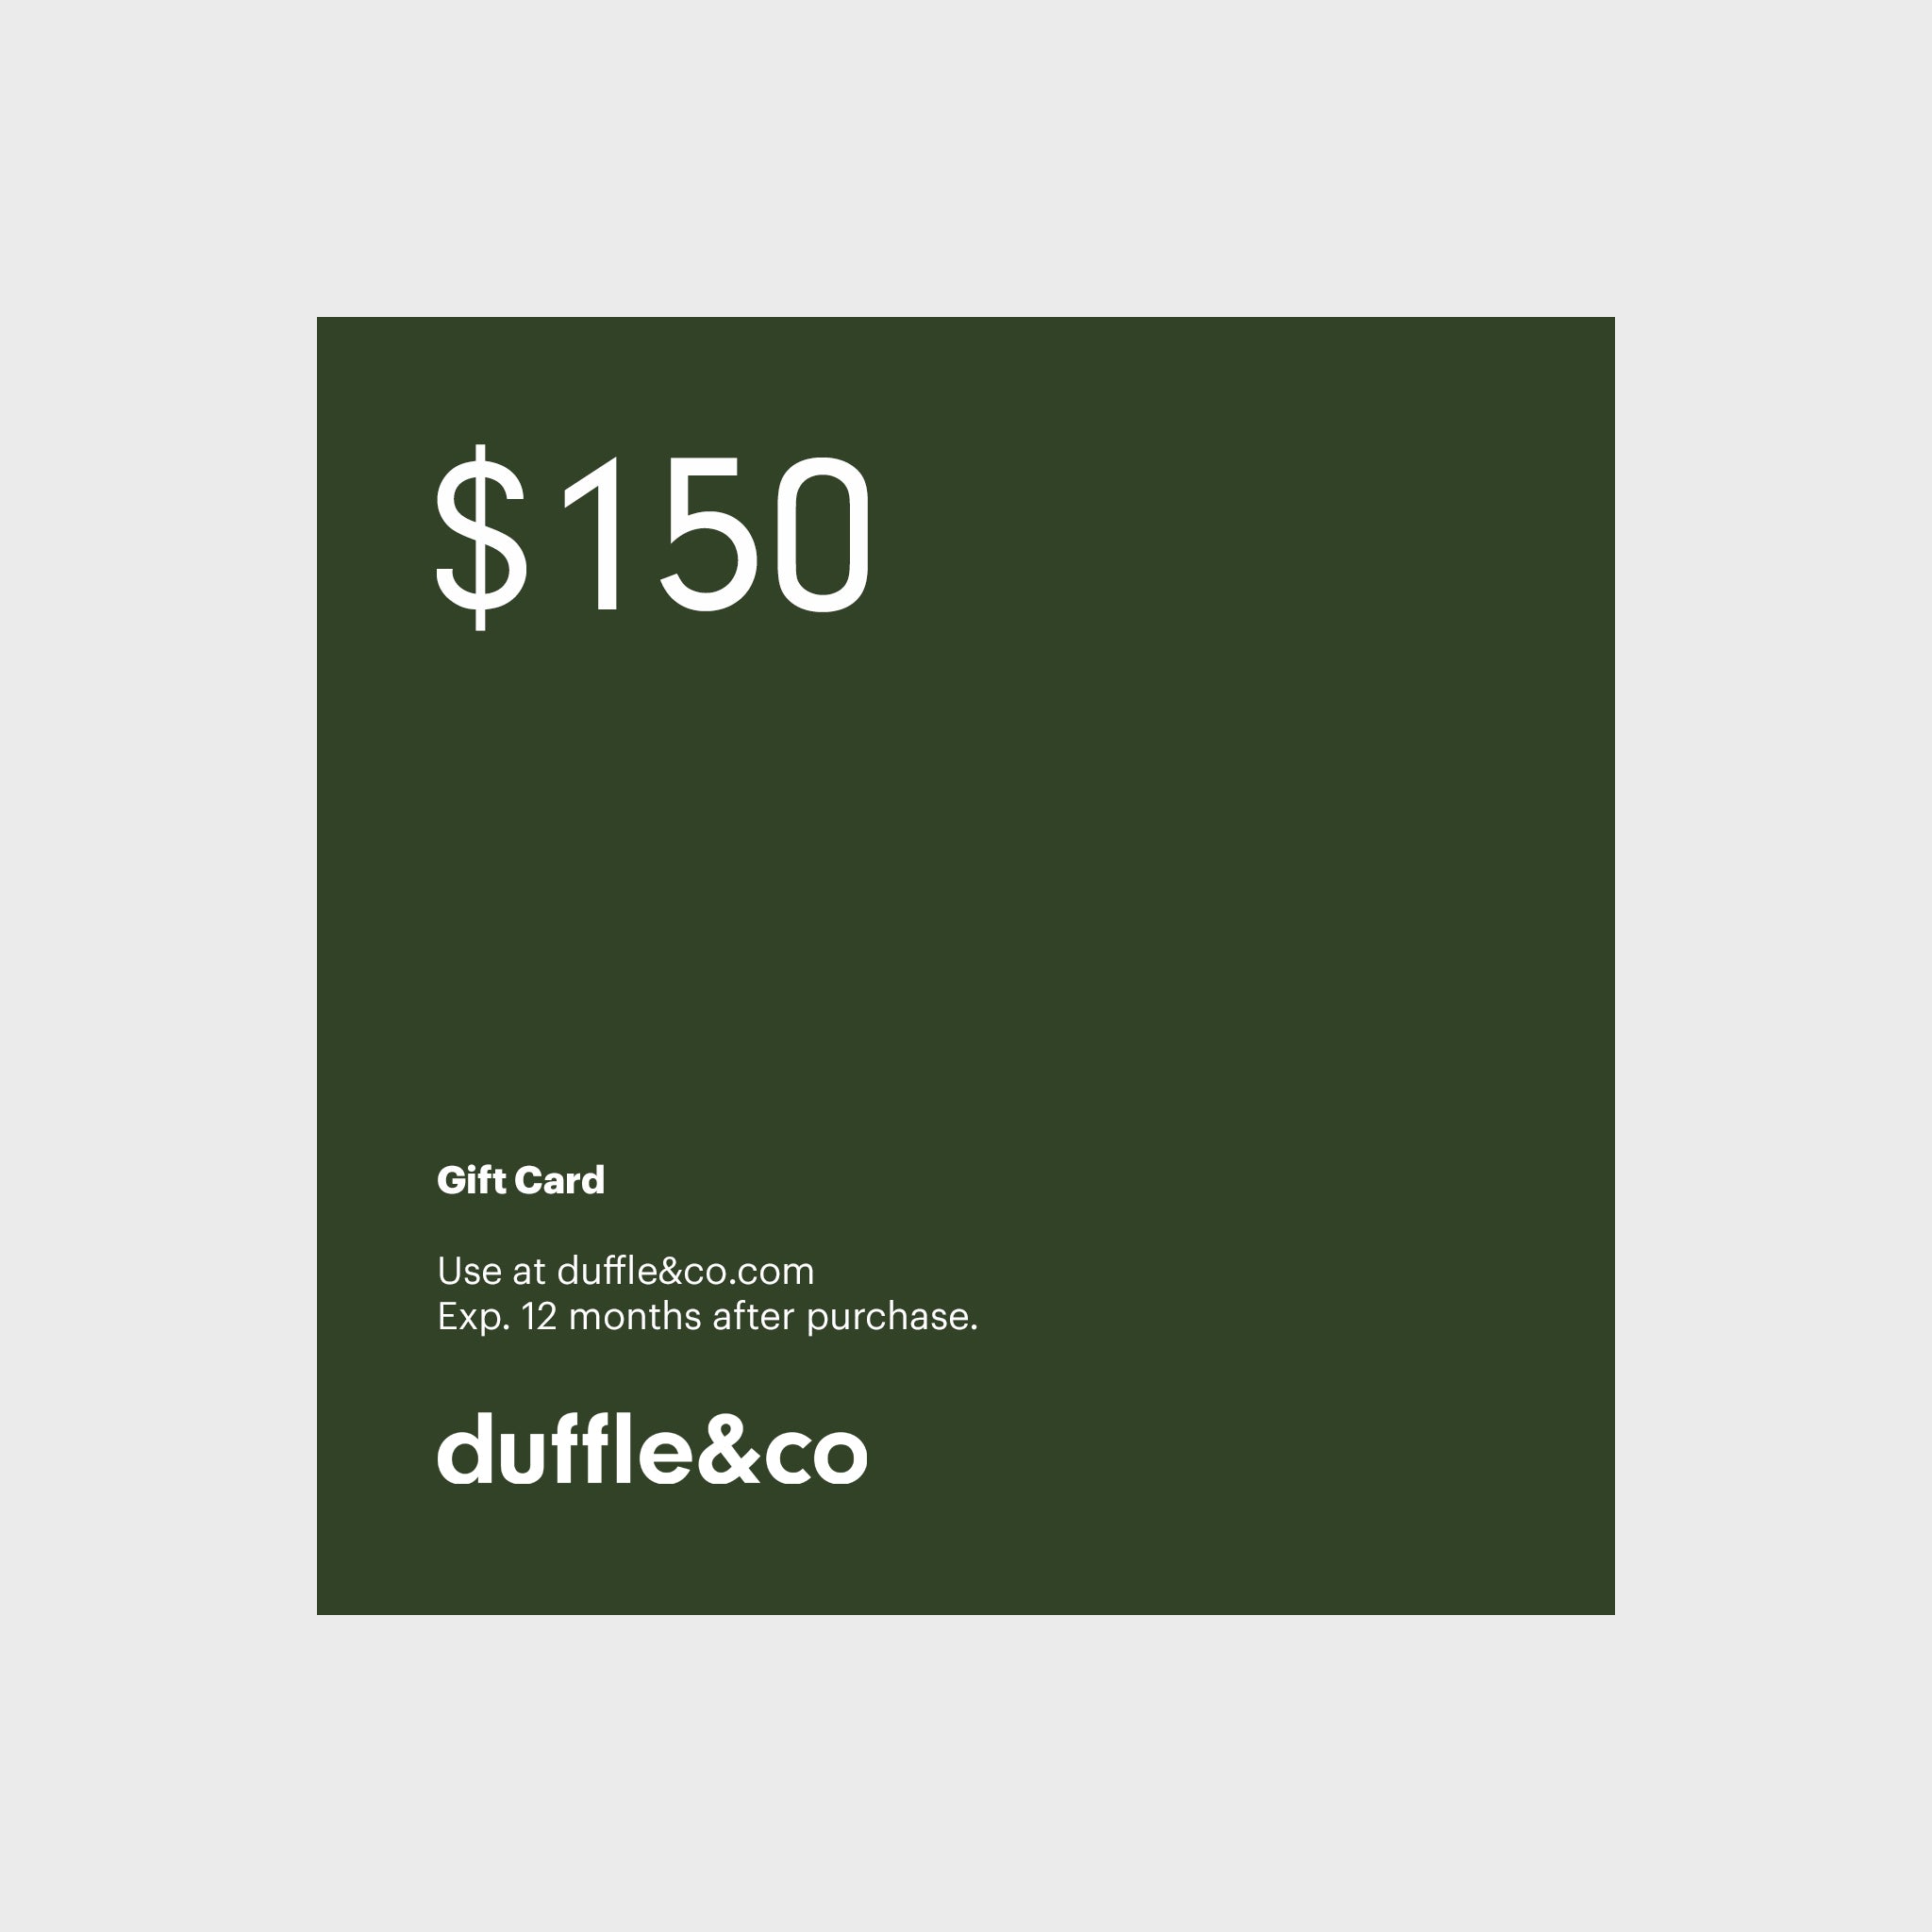 Duffle&Co Gift Card for $150